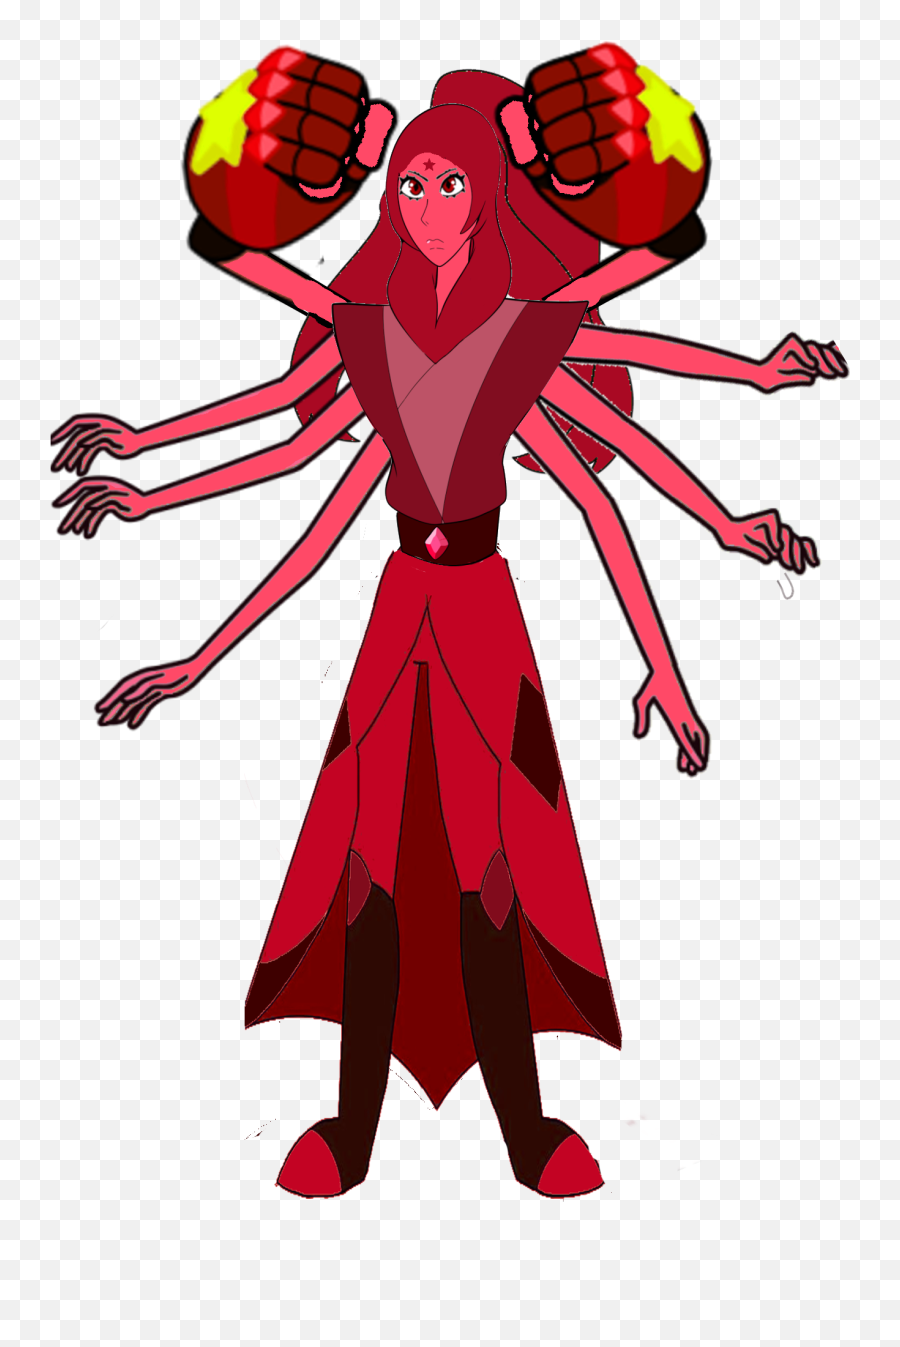 Download Red Diamond Of The Nine - Cartoon Png Image Cartoon,Red Diamond Png